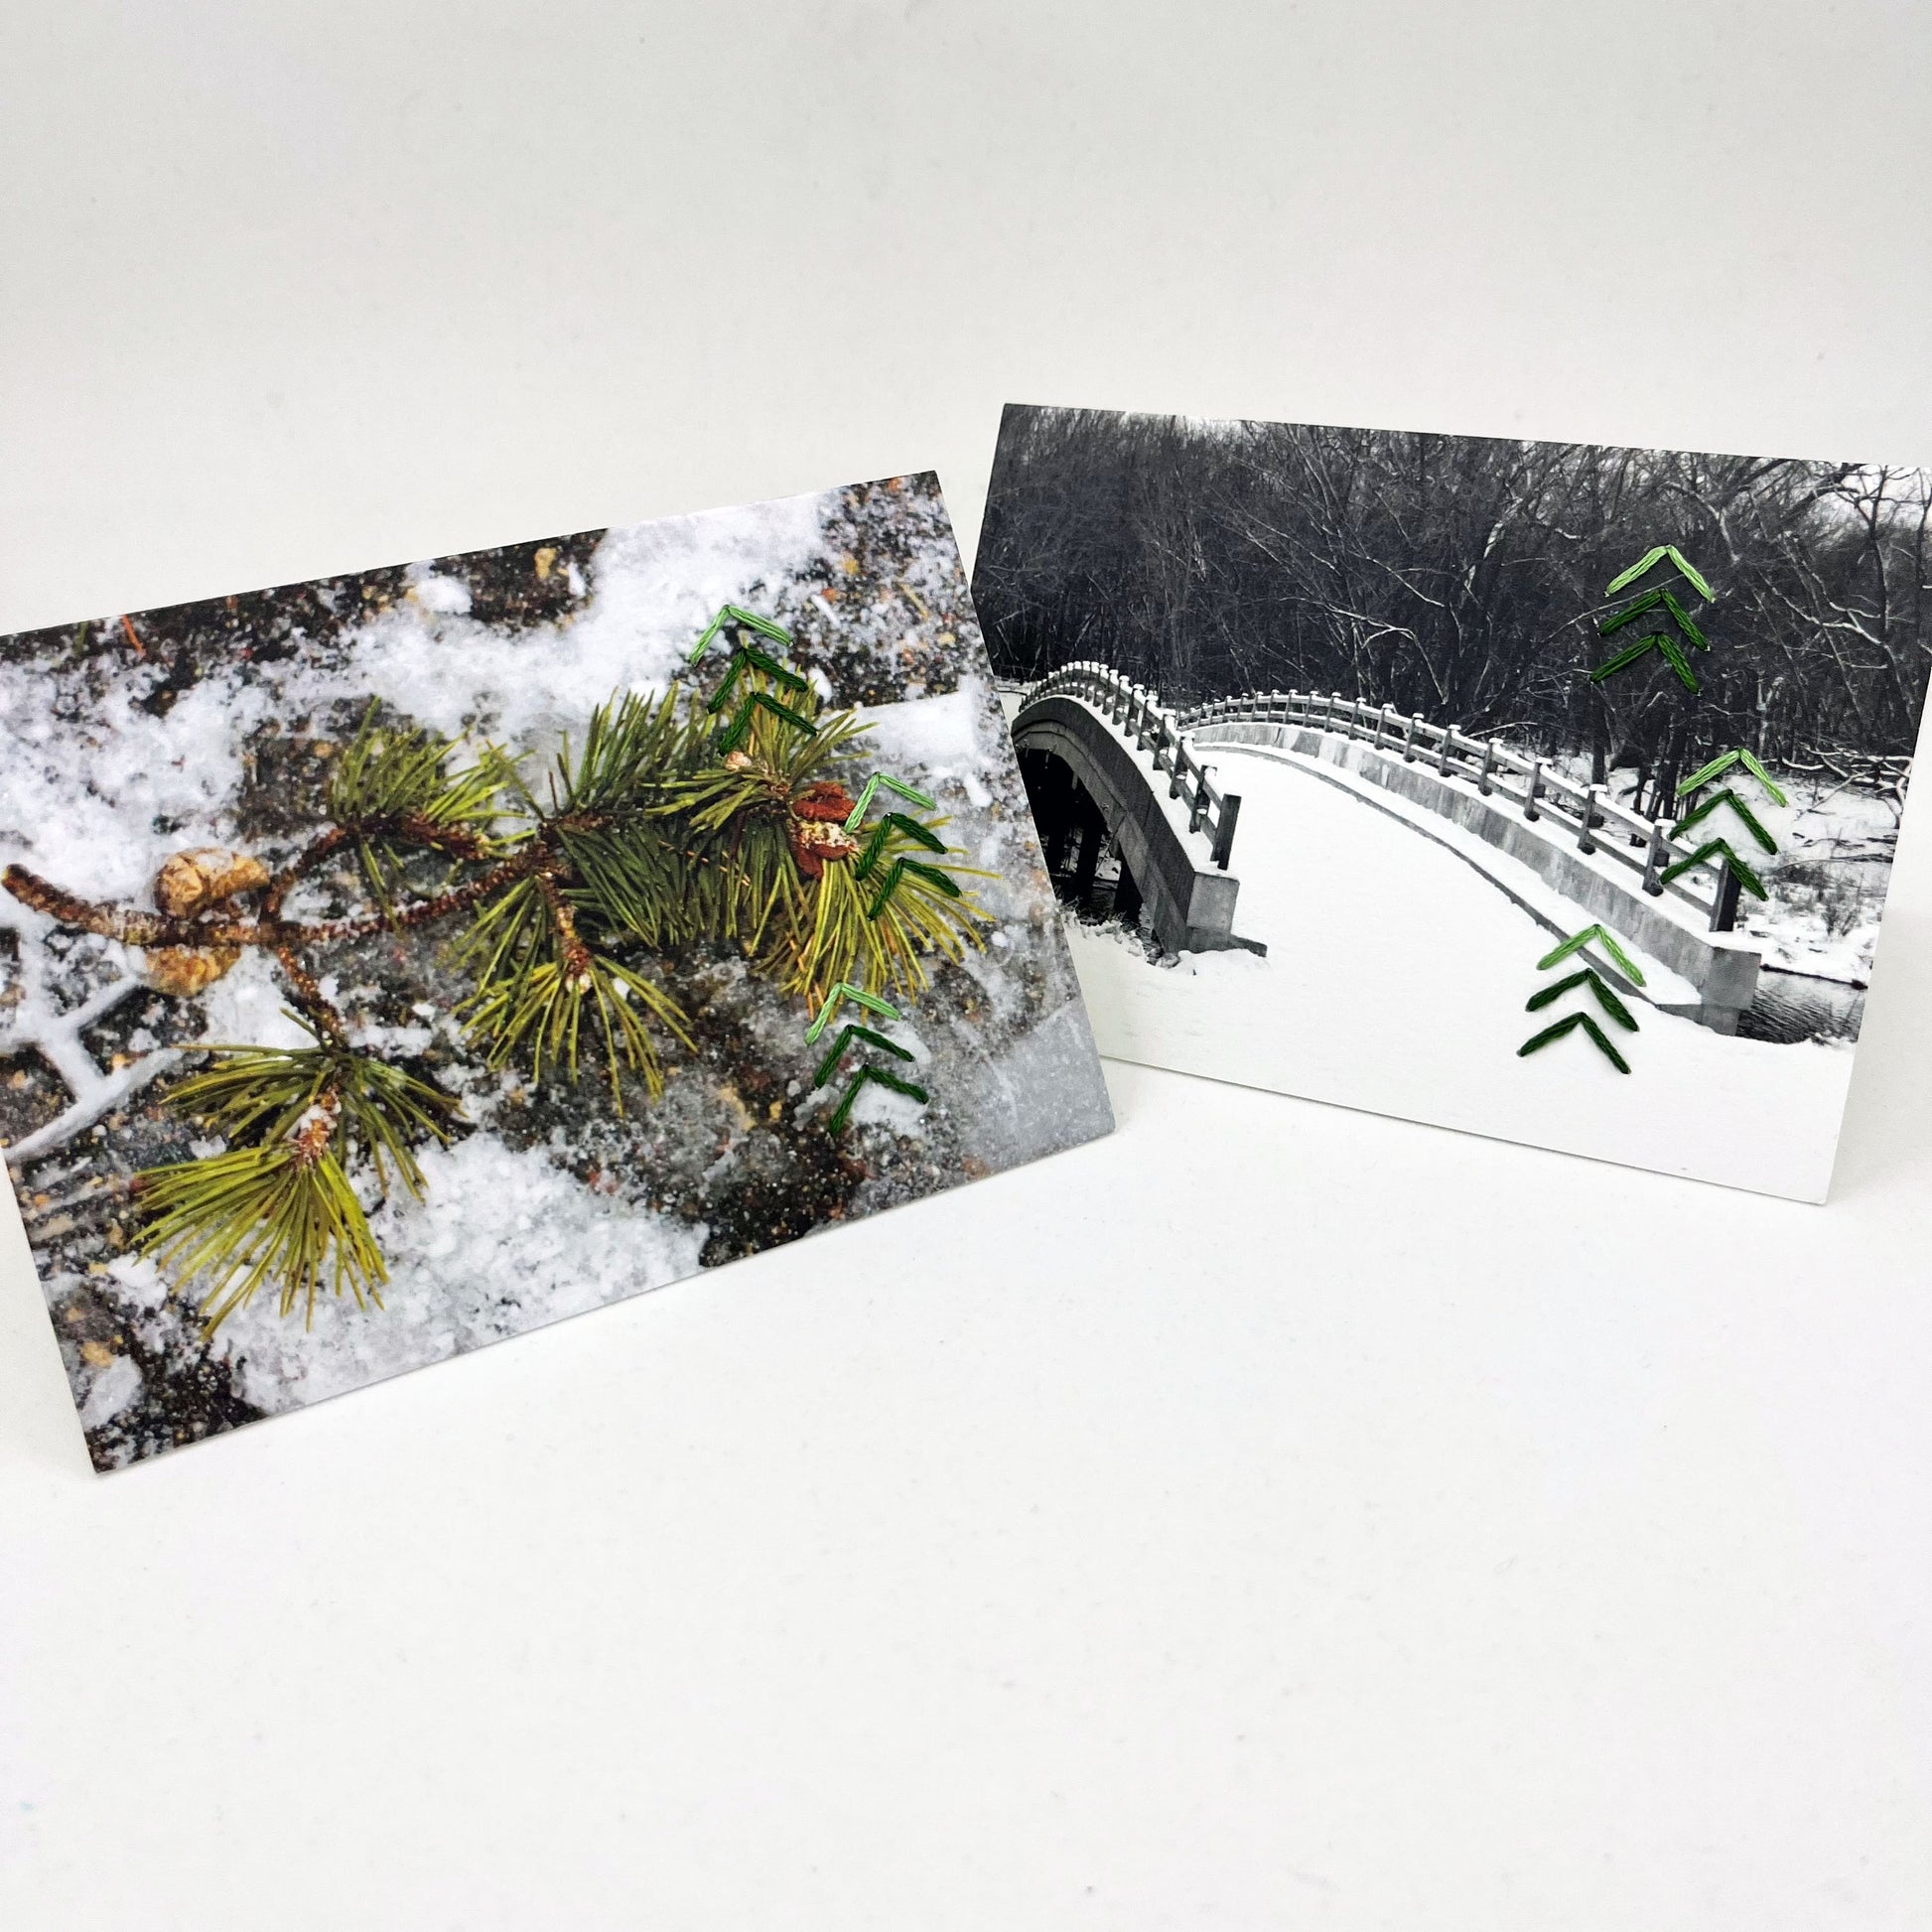 a group of two greeting cards standing up, depicting winter scenes of a snow covered bridge and a pine tree branch in snow, hand stitched over with groups of green chevrons resembling a pine tree down the right side